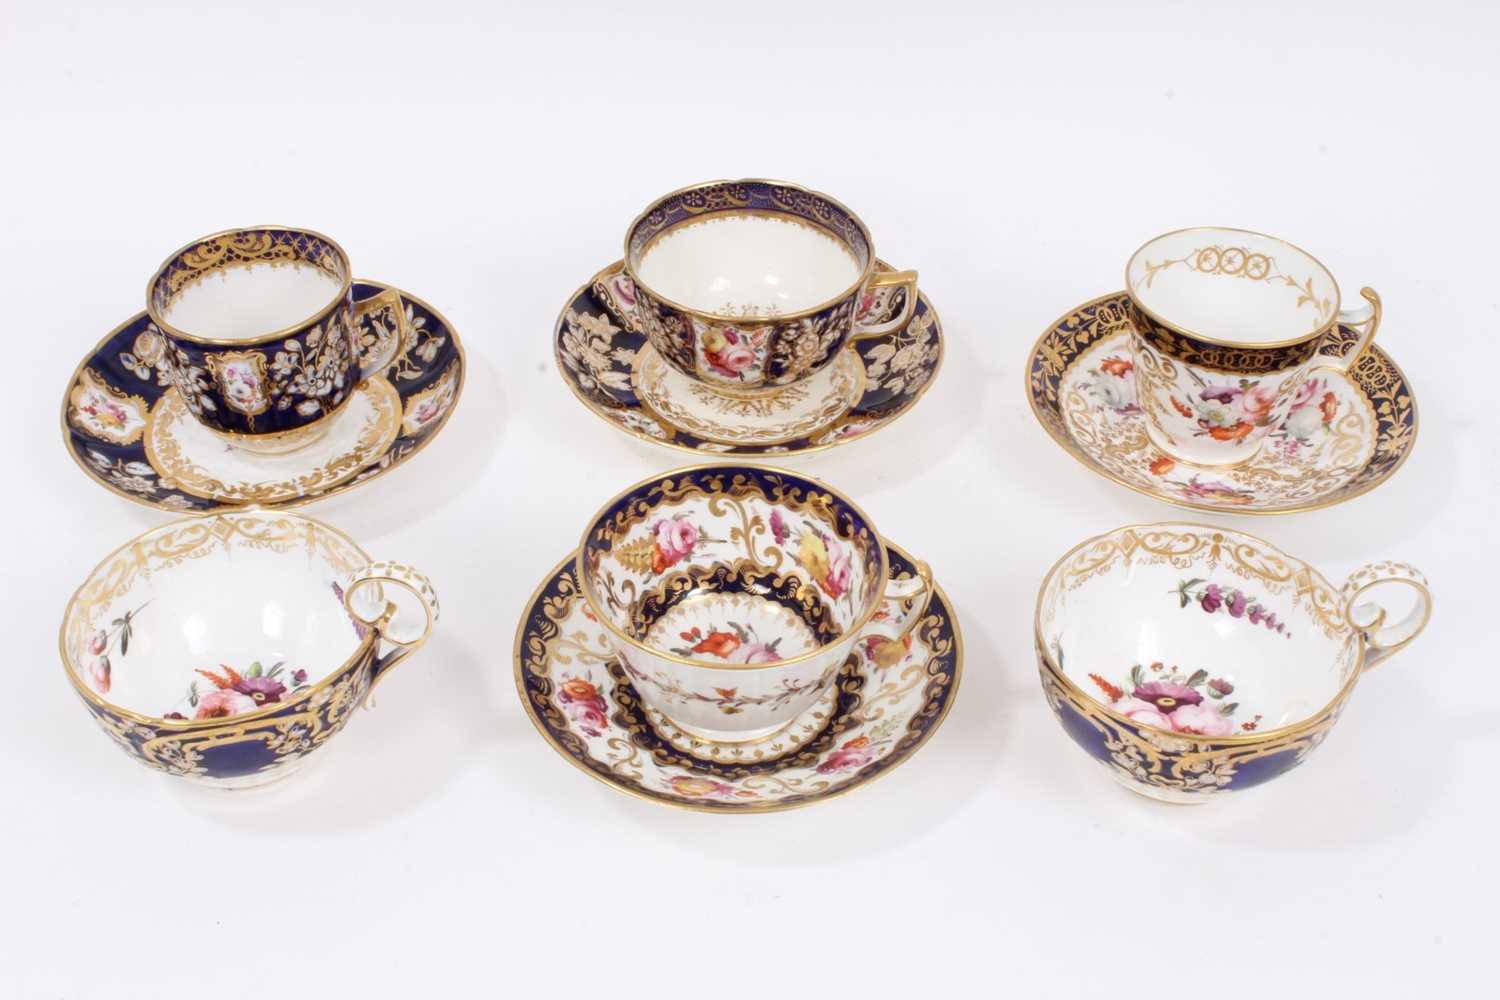 Lot 313 - Early 19th century Coalport tea wares, with polychrome floral decoration on gilt patterned grounds, some pieces moulding, including four matching cups and saucers and two further matching cups (10)